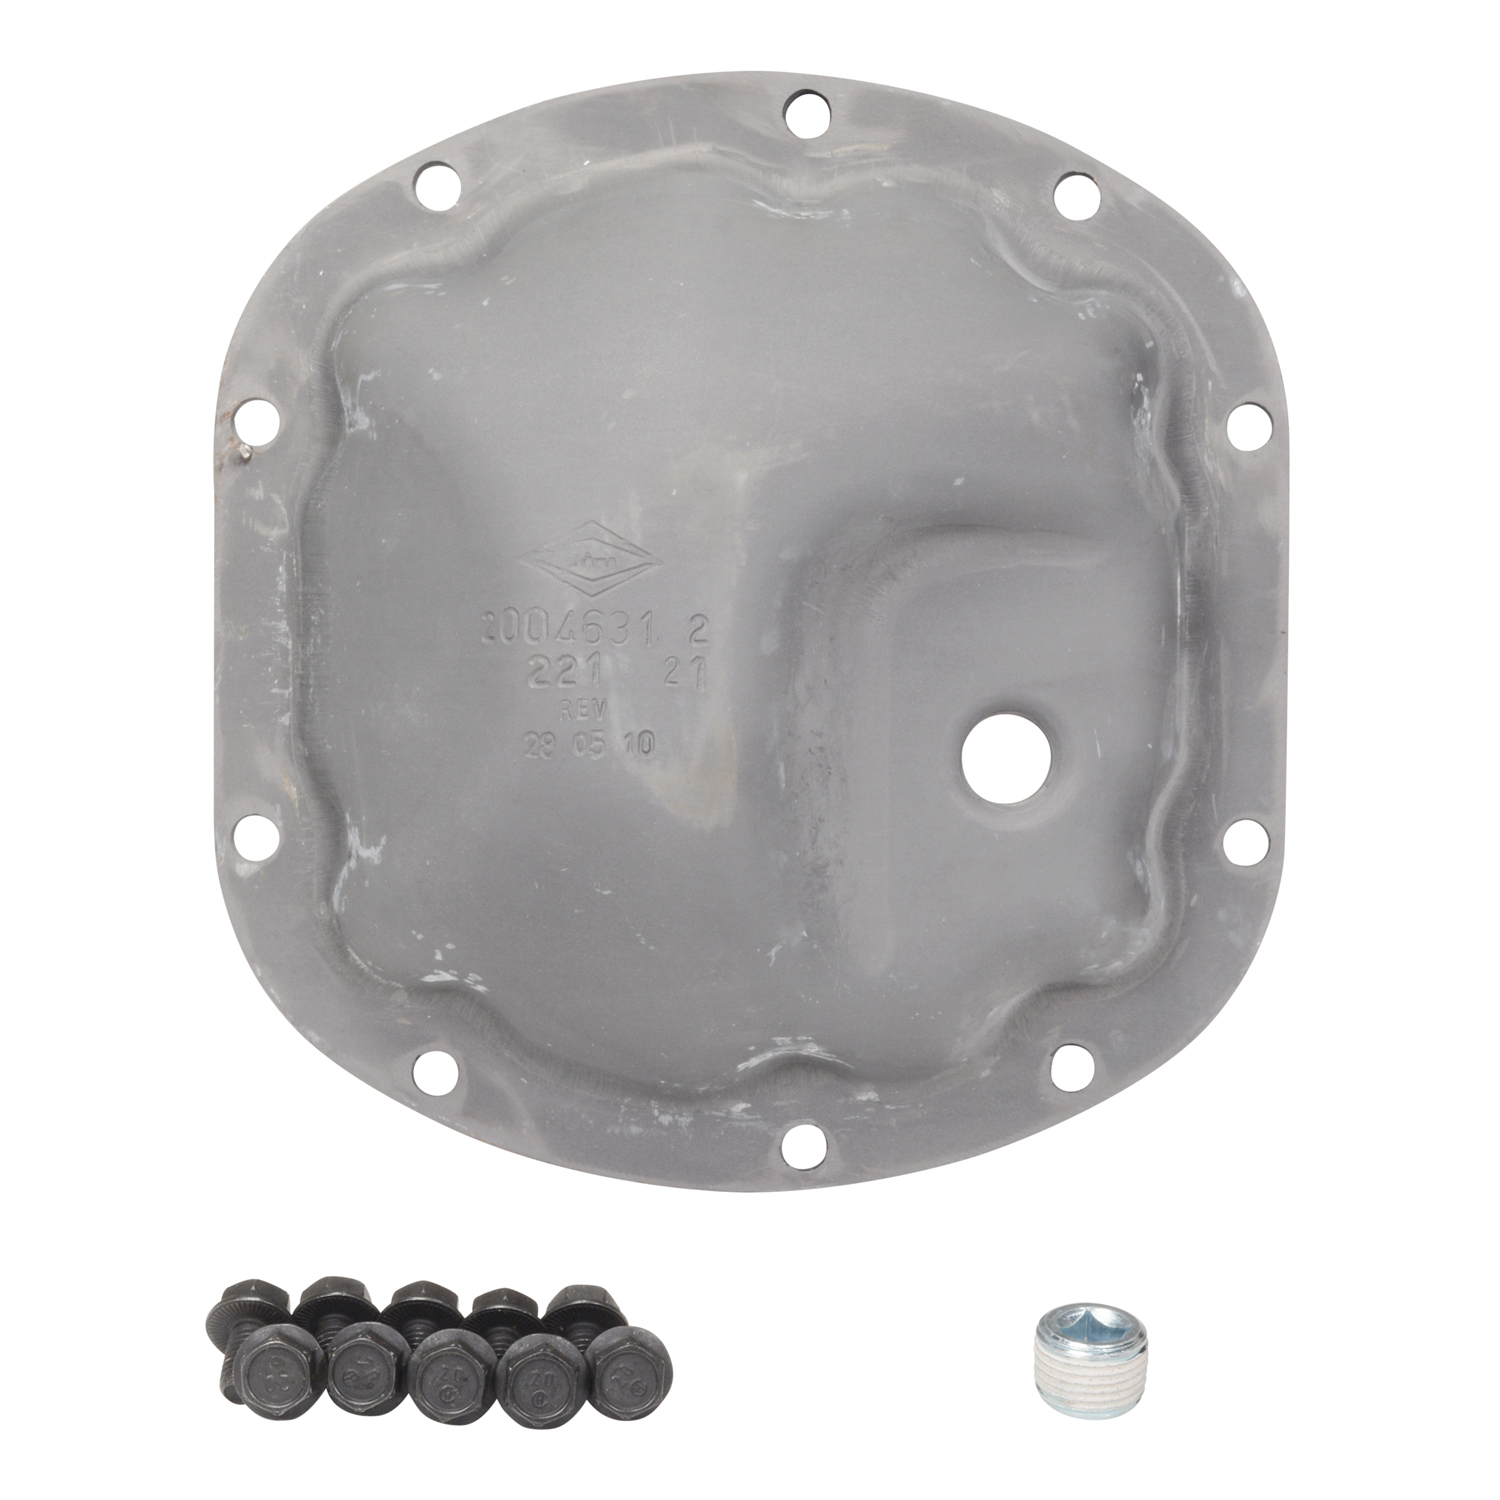 Steel cover for Dana 30 standard rotation front 